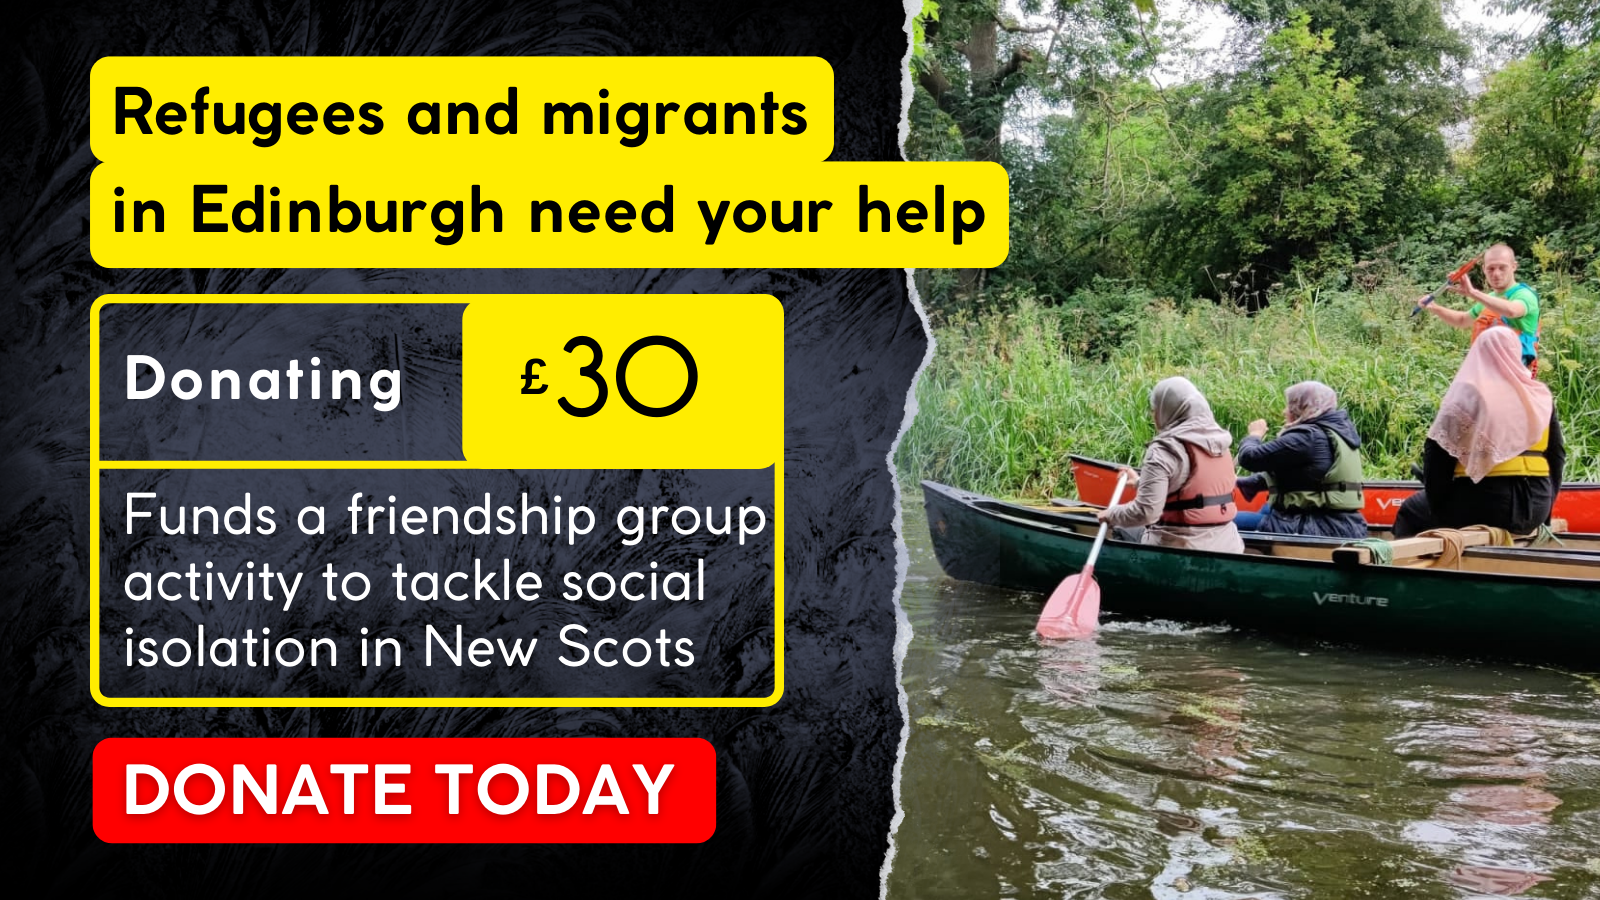 Donating £30 will fund a friendship group activity to tackle social isolation in New Scots